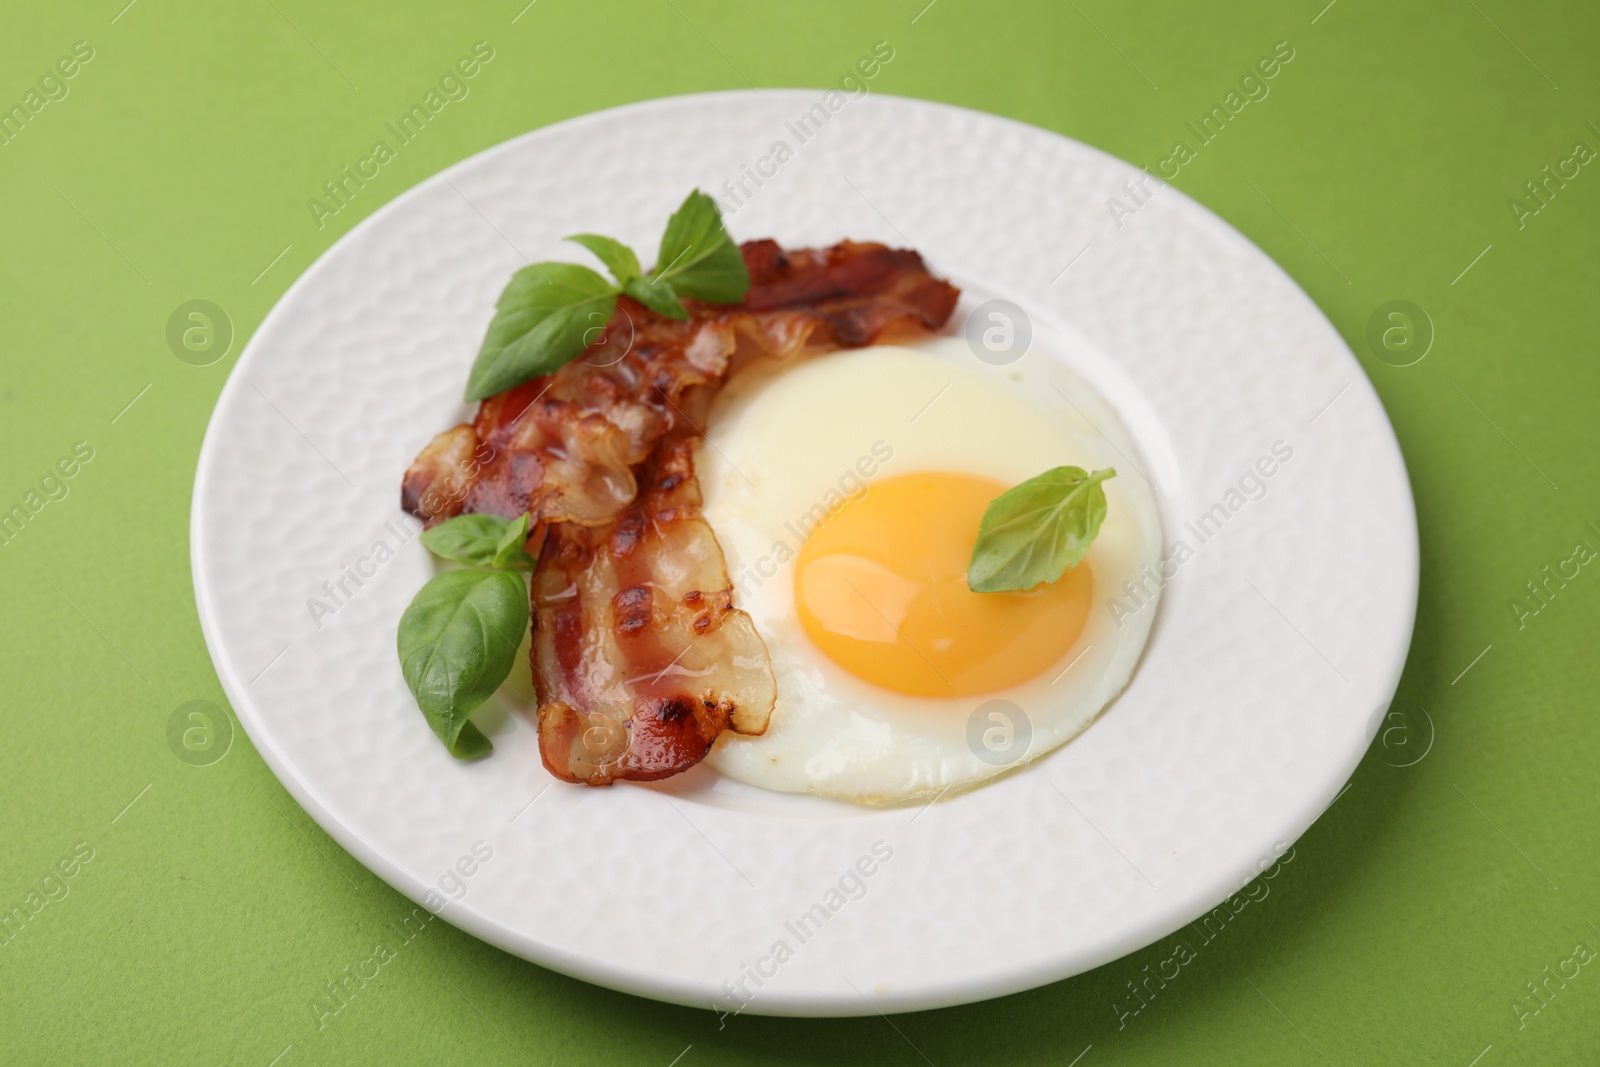 Photo of Fried egg, bacon and basil on green background